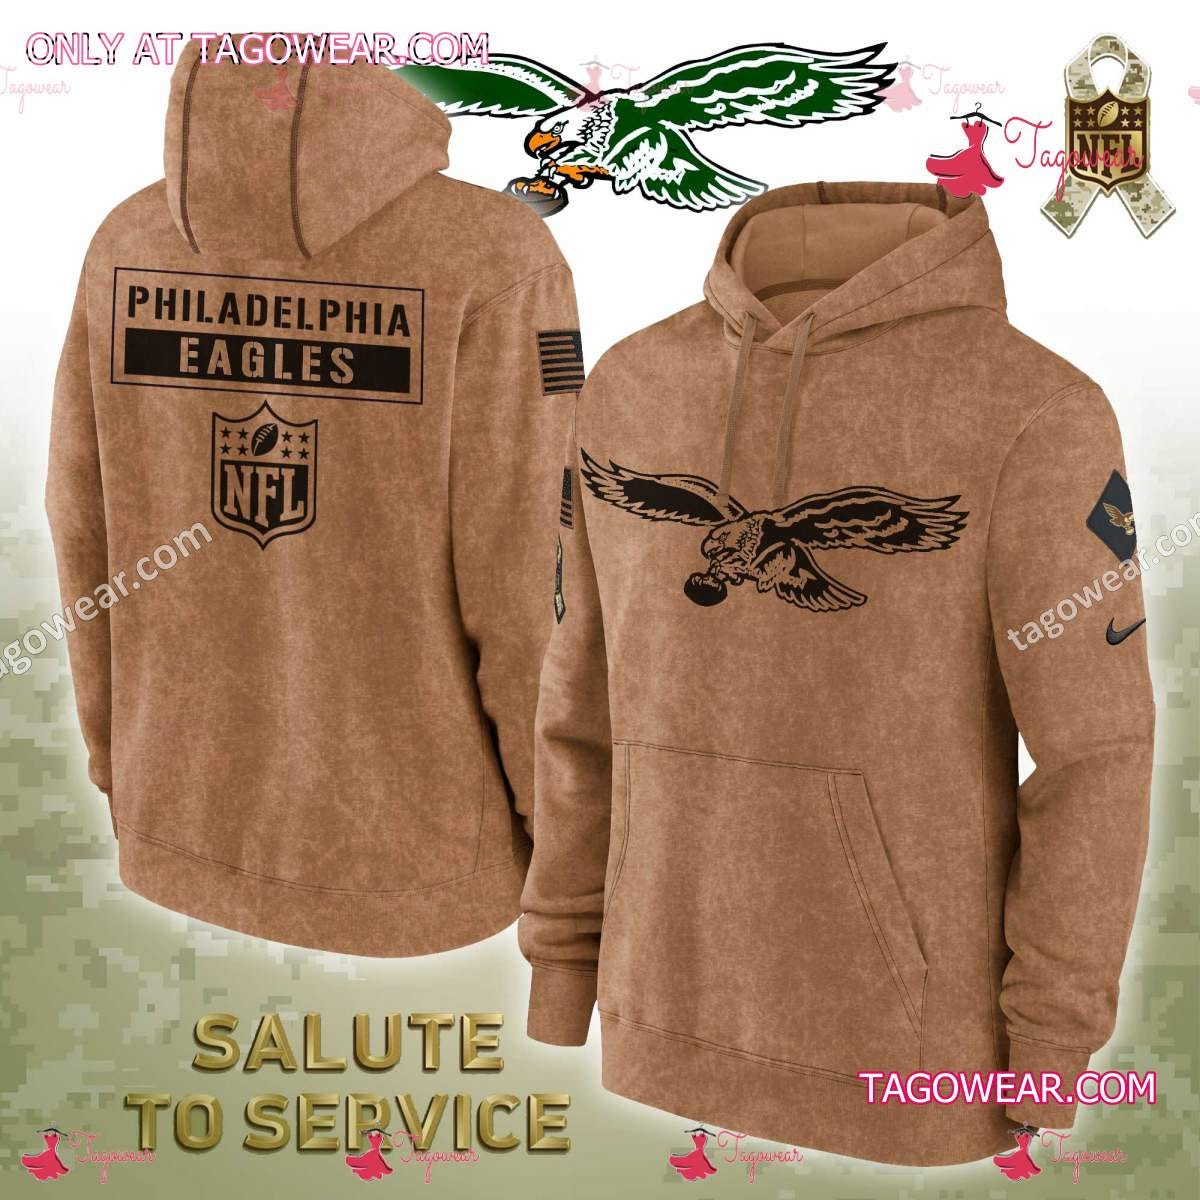 Philadelphia Eagles NFL Veterans Salute to Service Hoodie: Show Your  Support and Honor Veterans with Pride, by Tagowear shirt